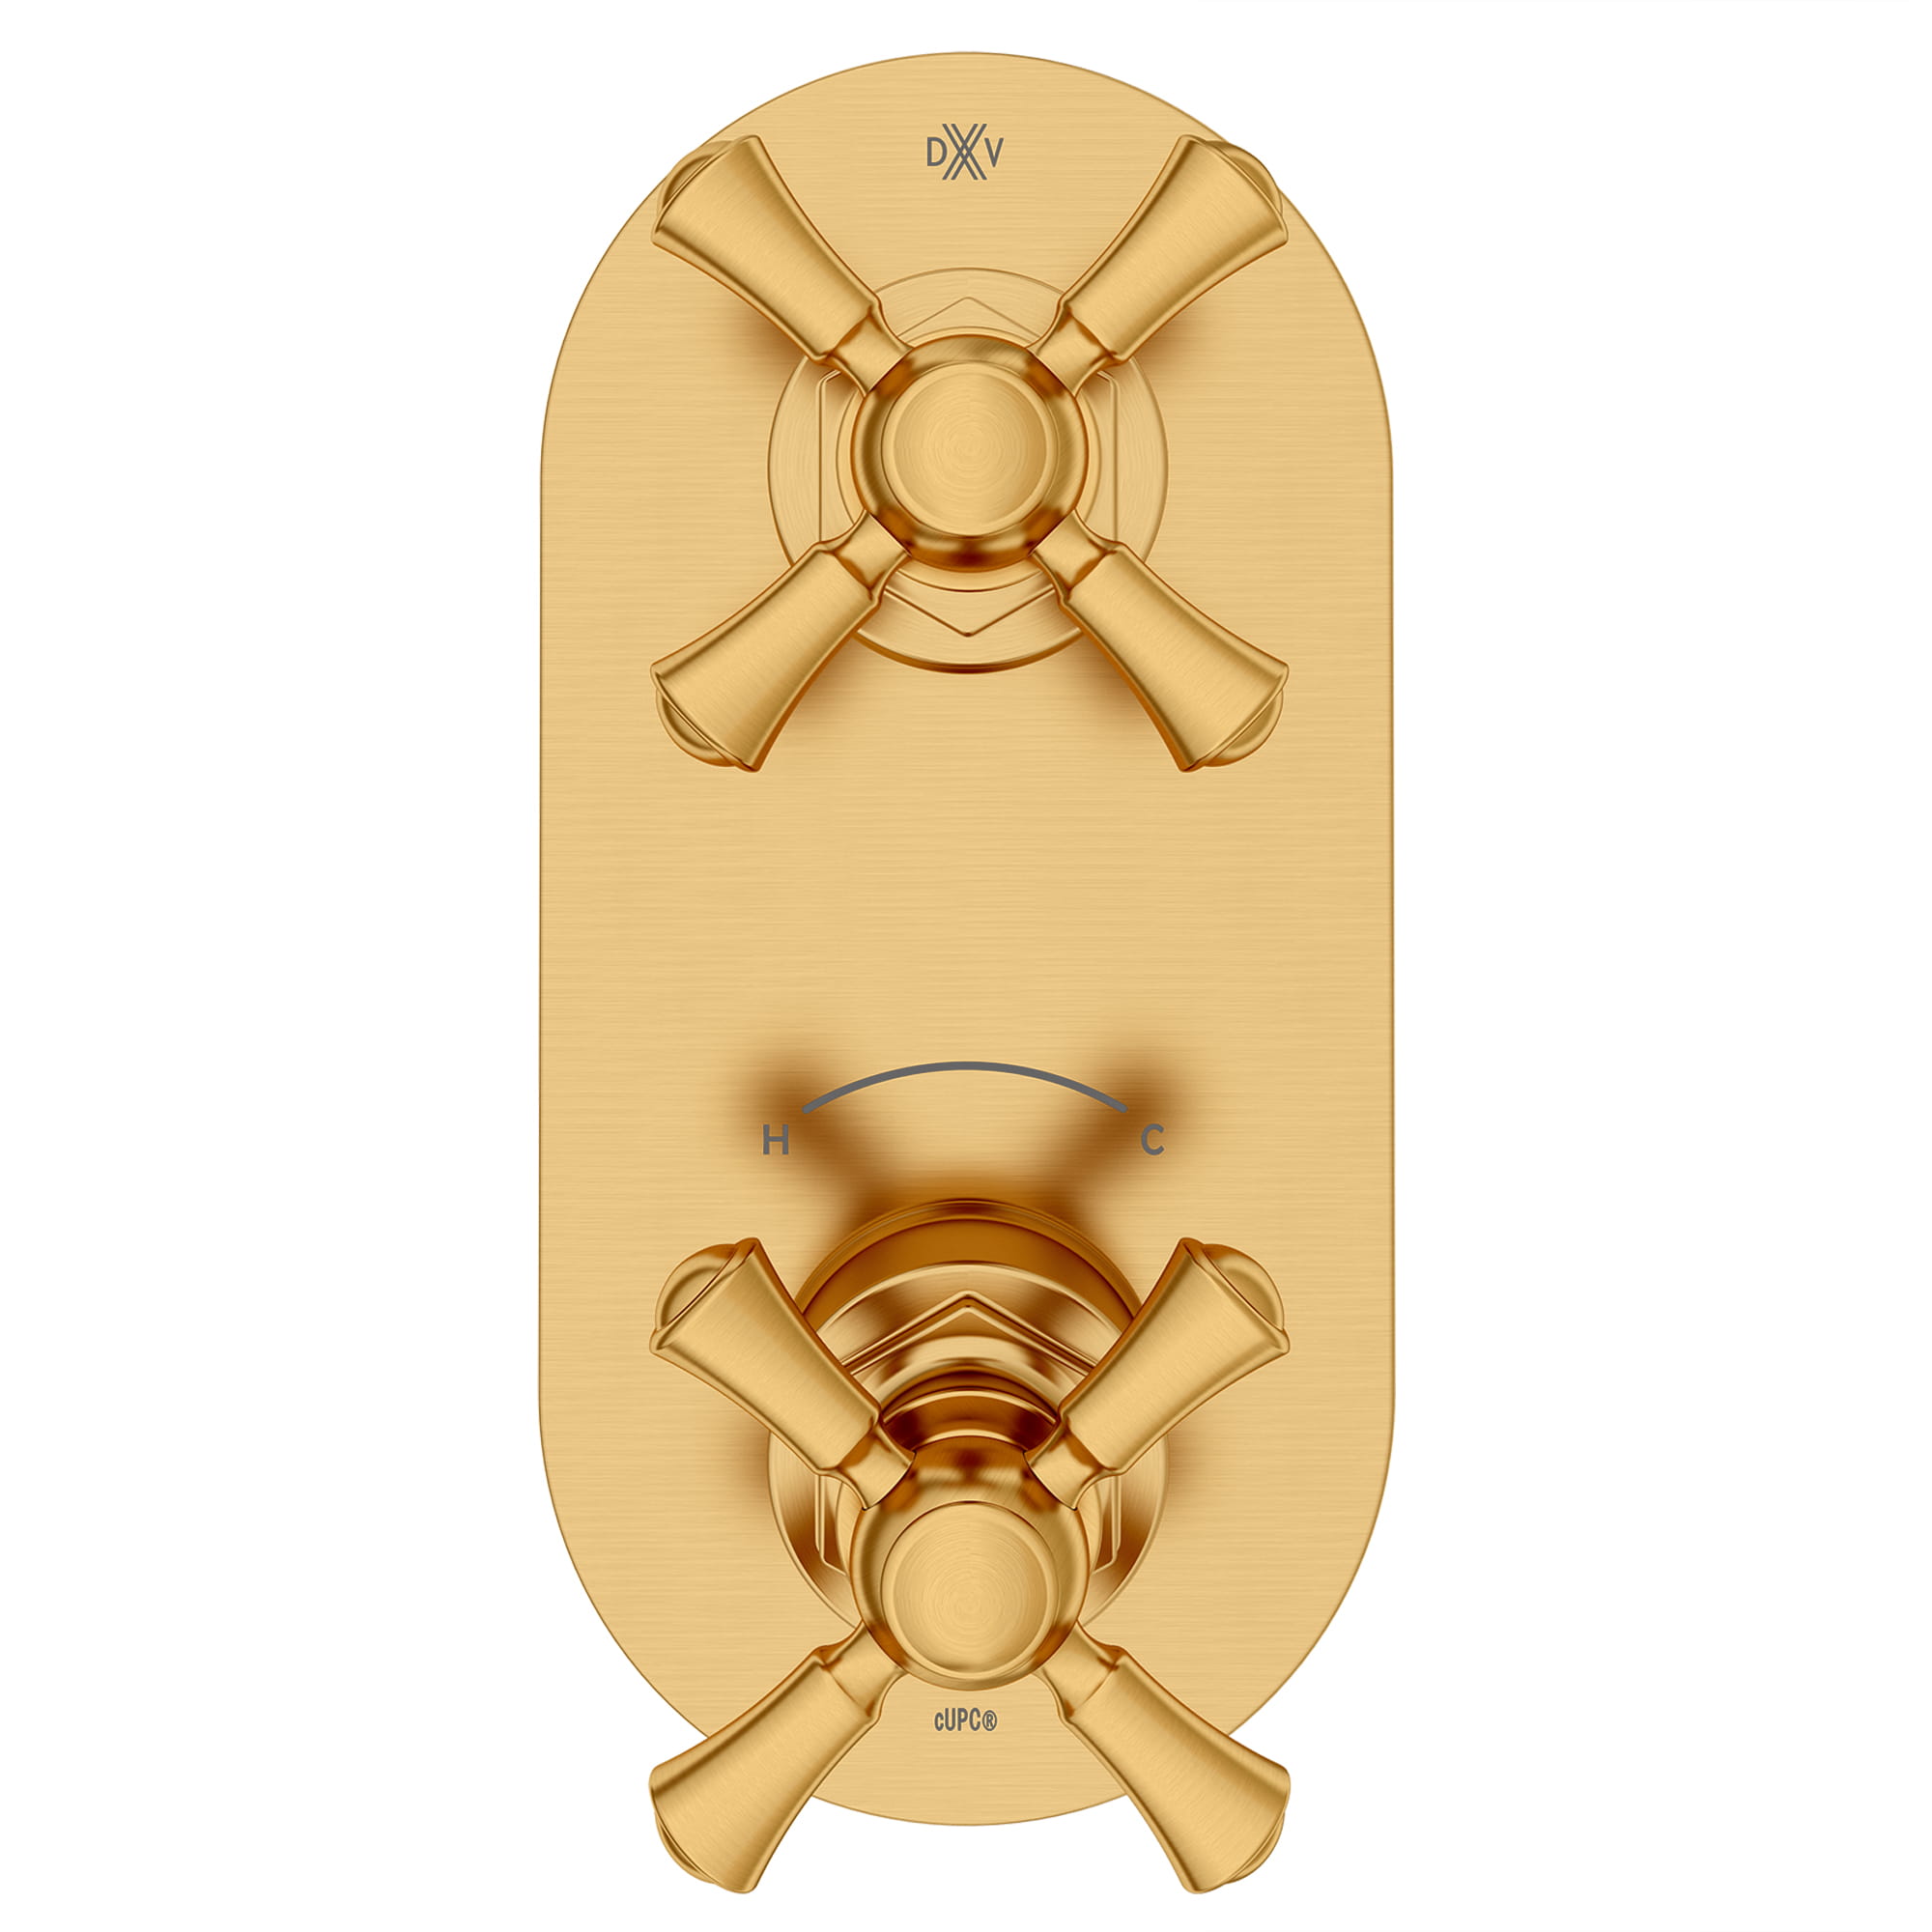 Oak Hill 2-Handle Thermostatic Valve Trim Only with Cross Handles